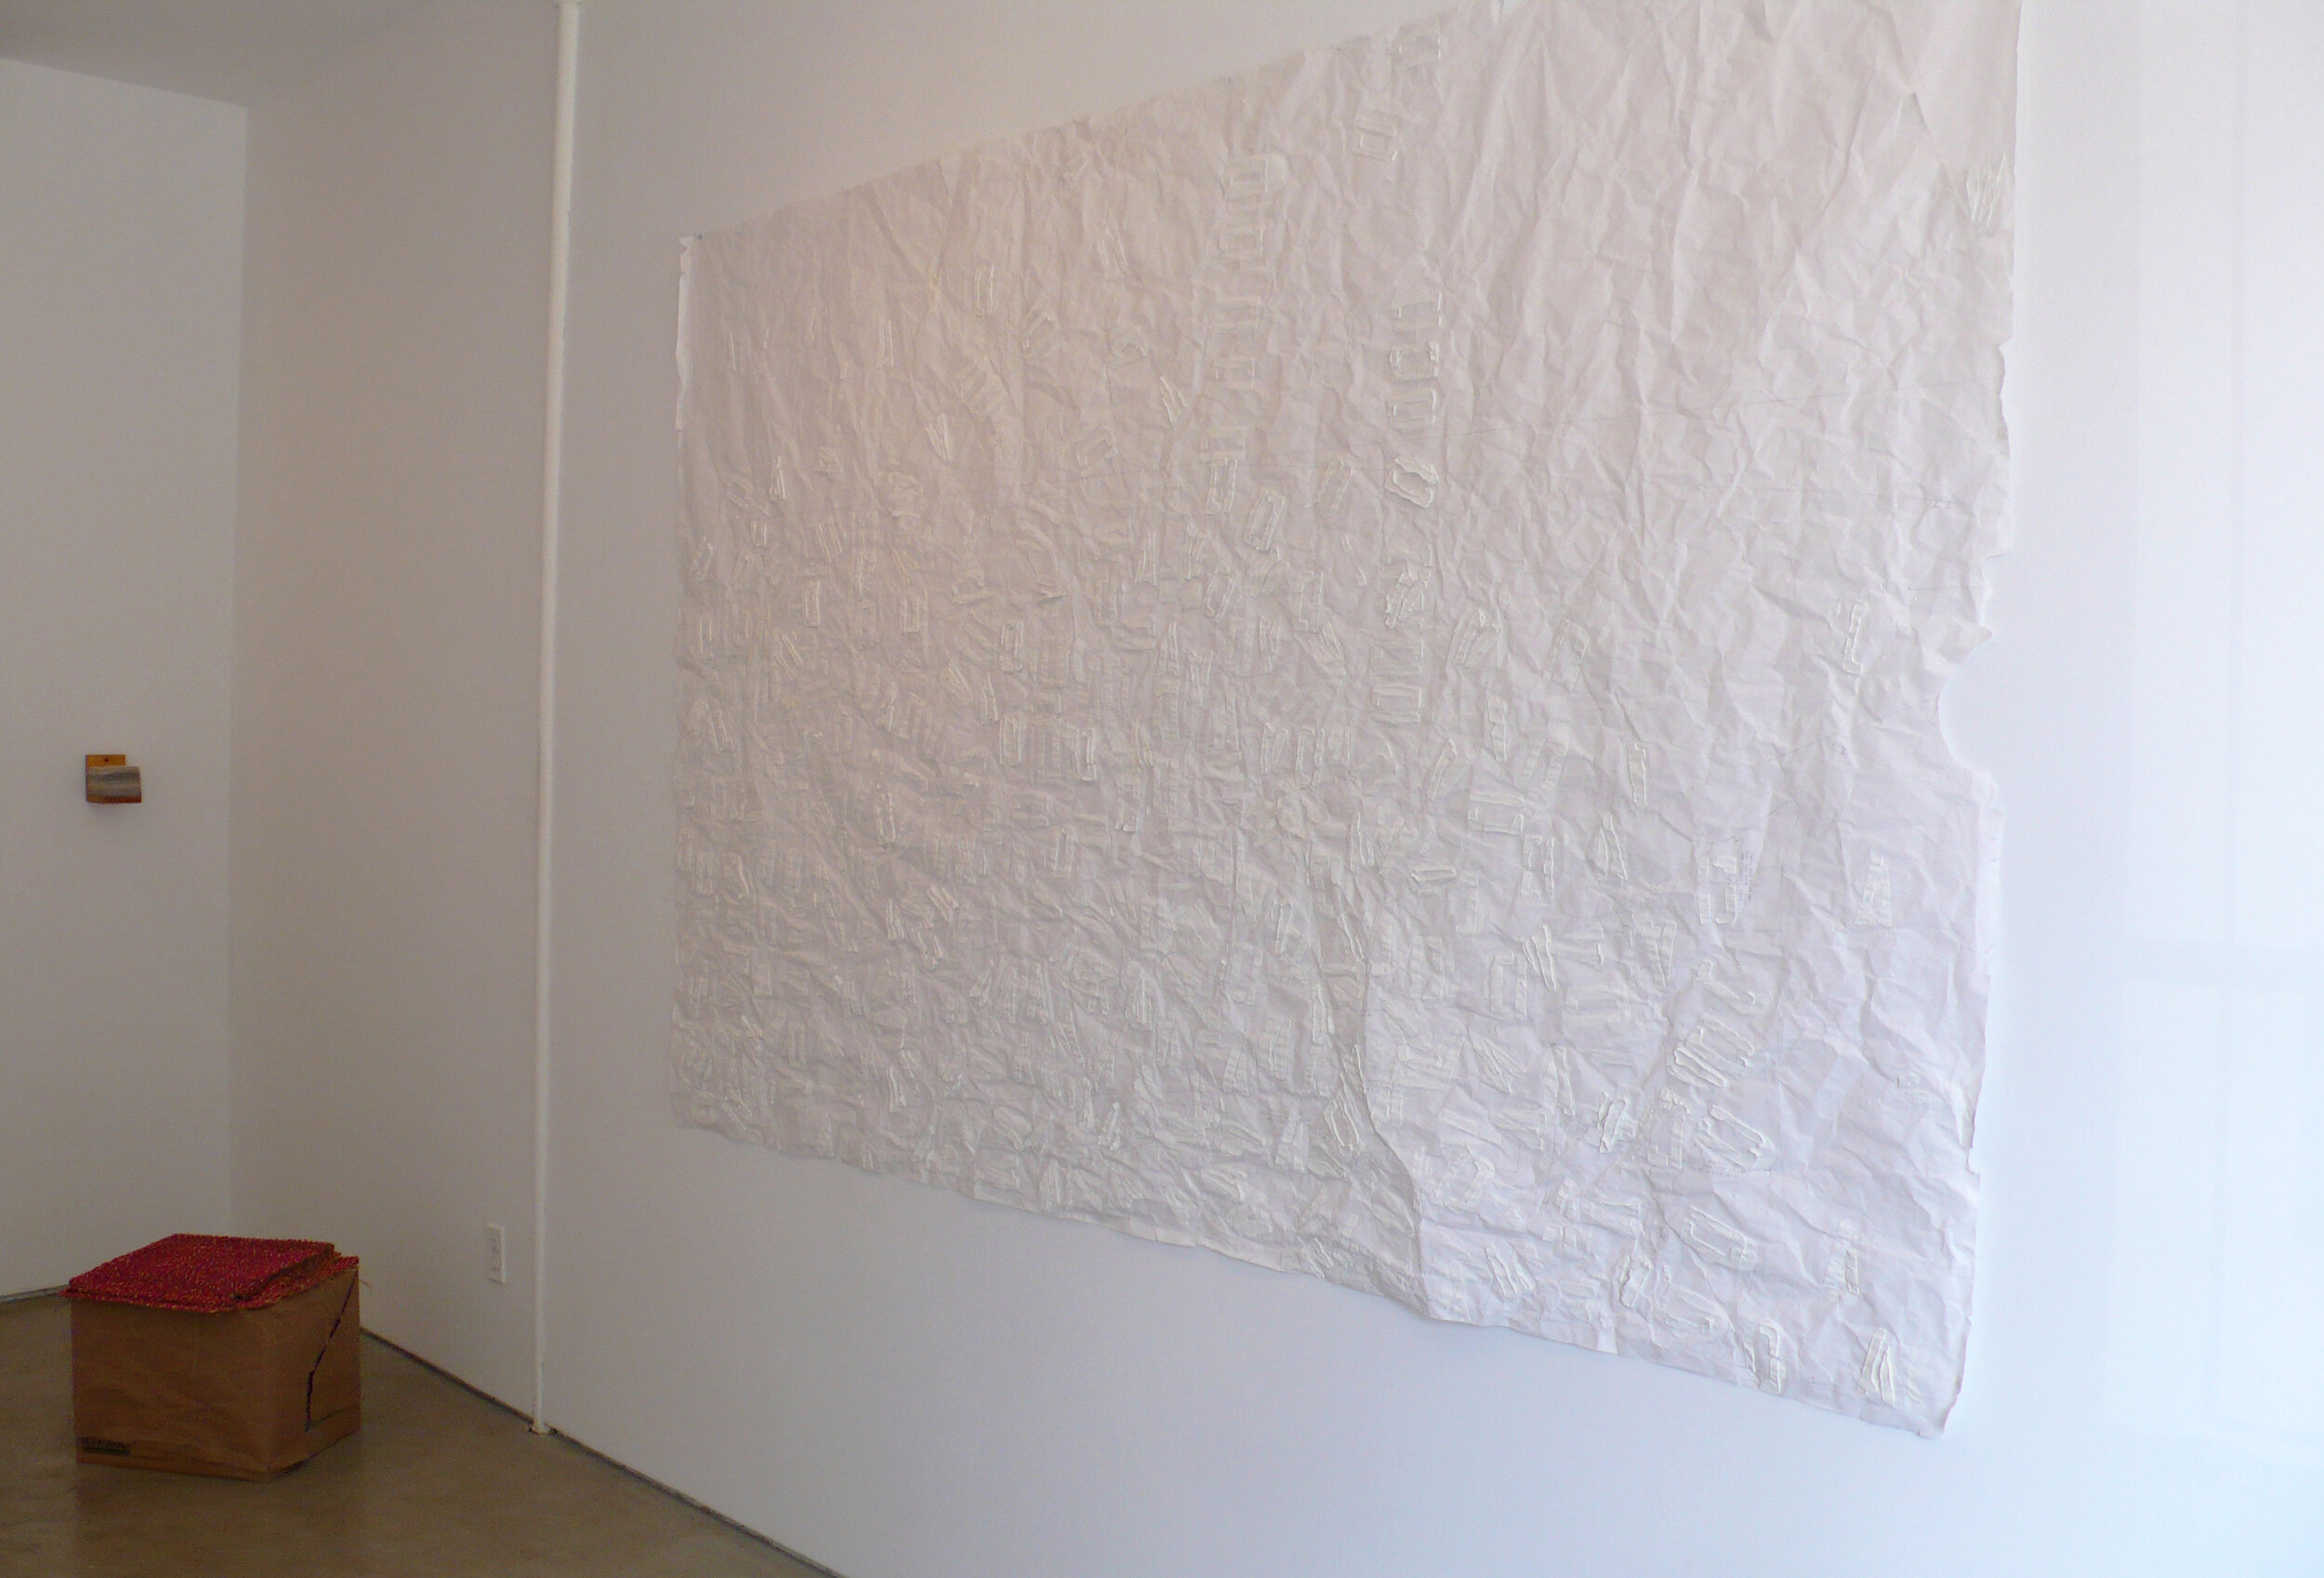 Installation image from the 2010 Keith O. Anderson exhibition, What Becomes of a Broken Heart, at Cindy Rucker Gallery